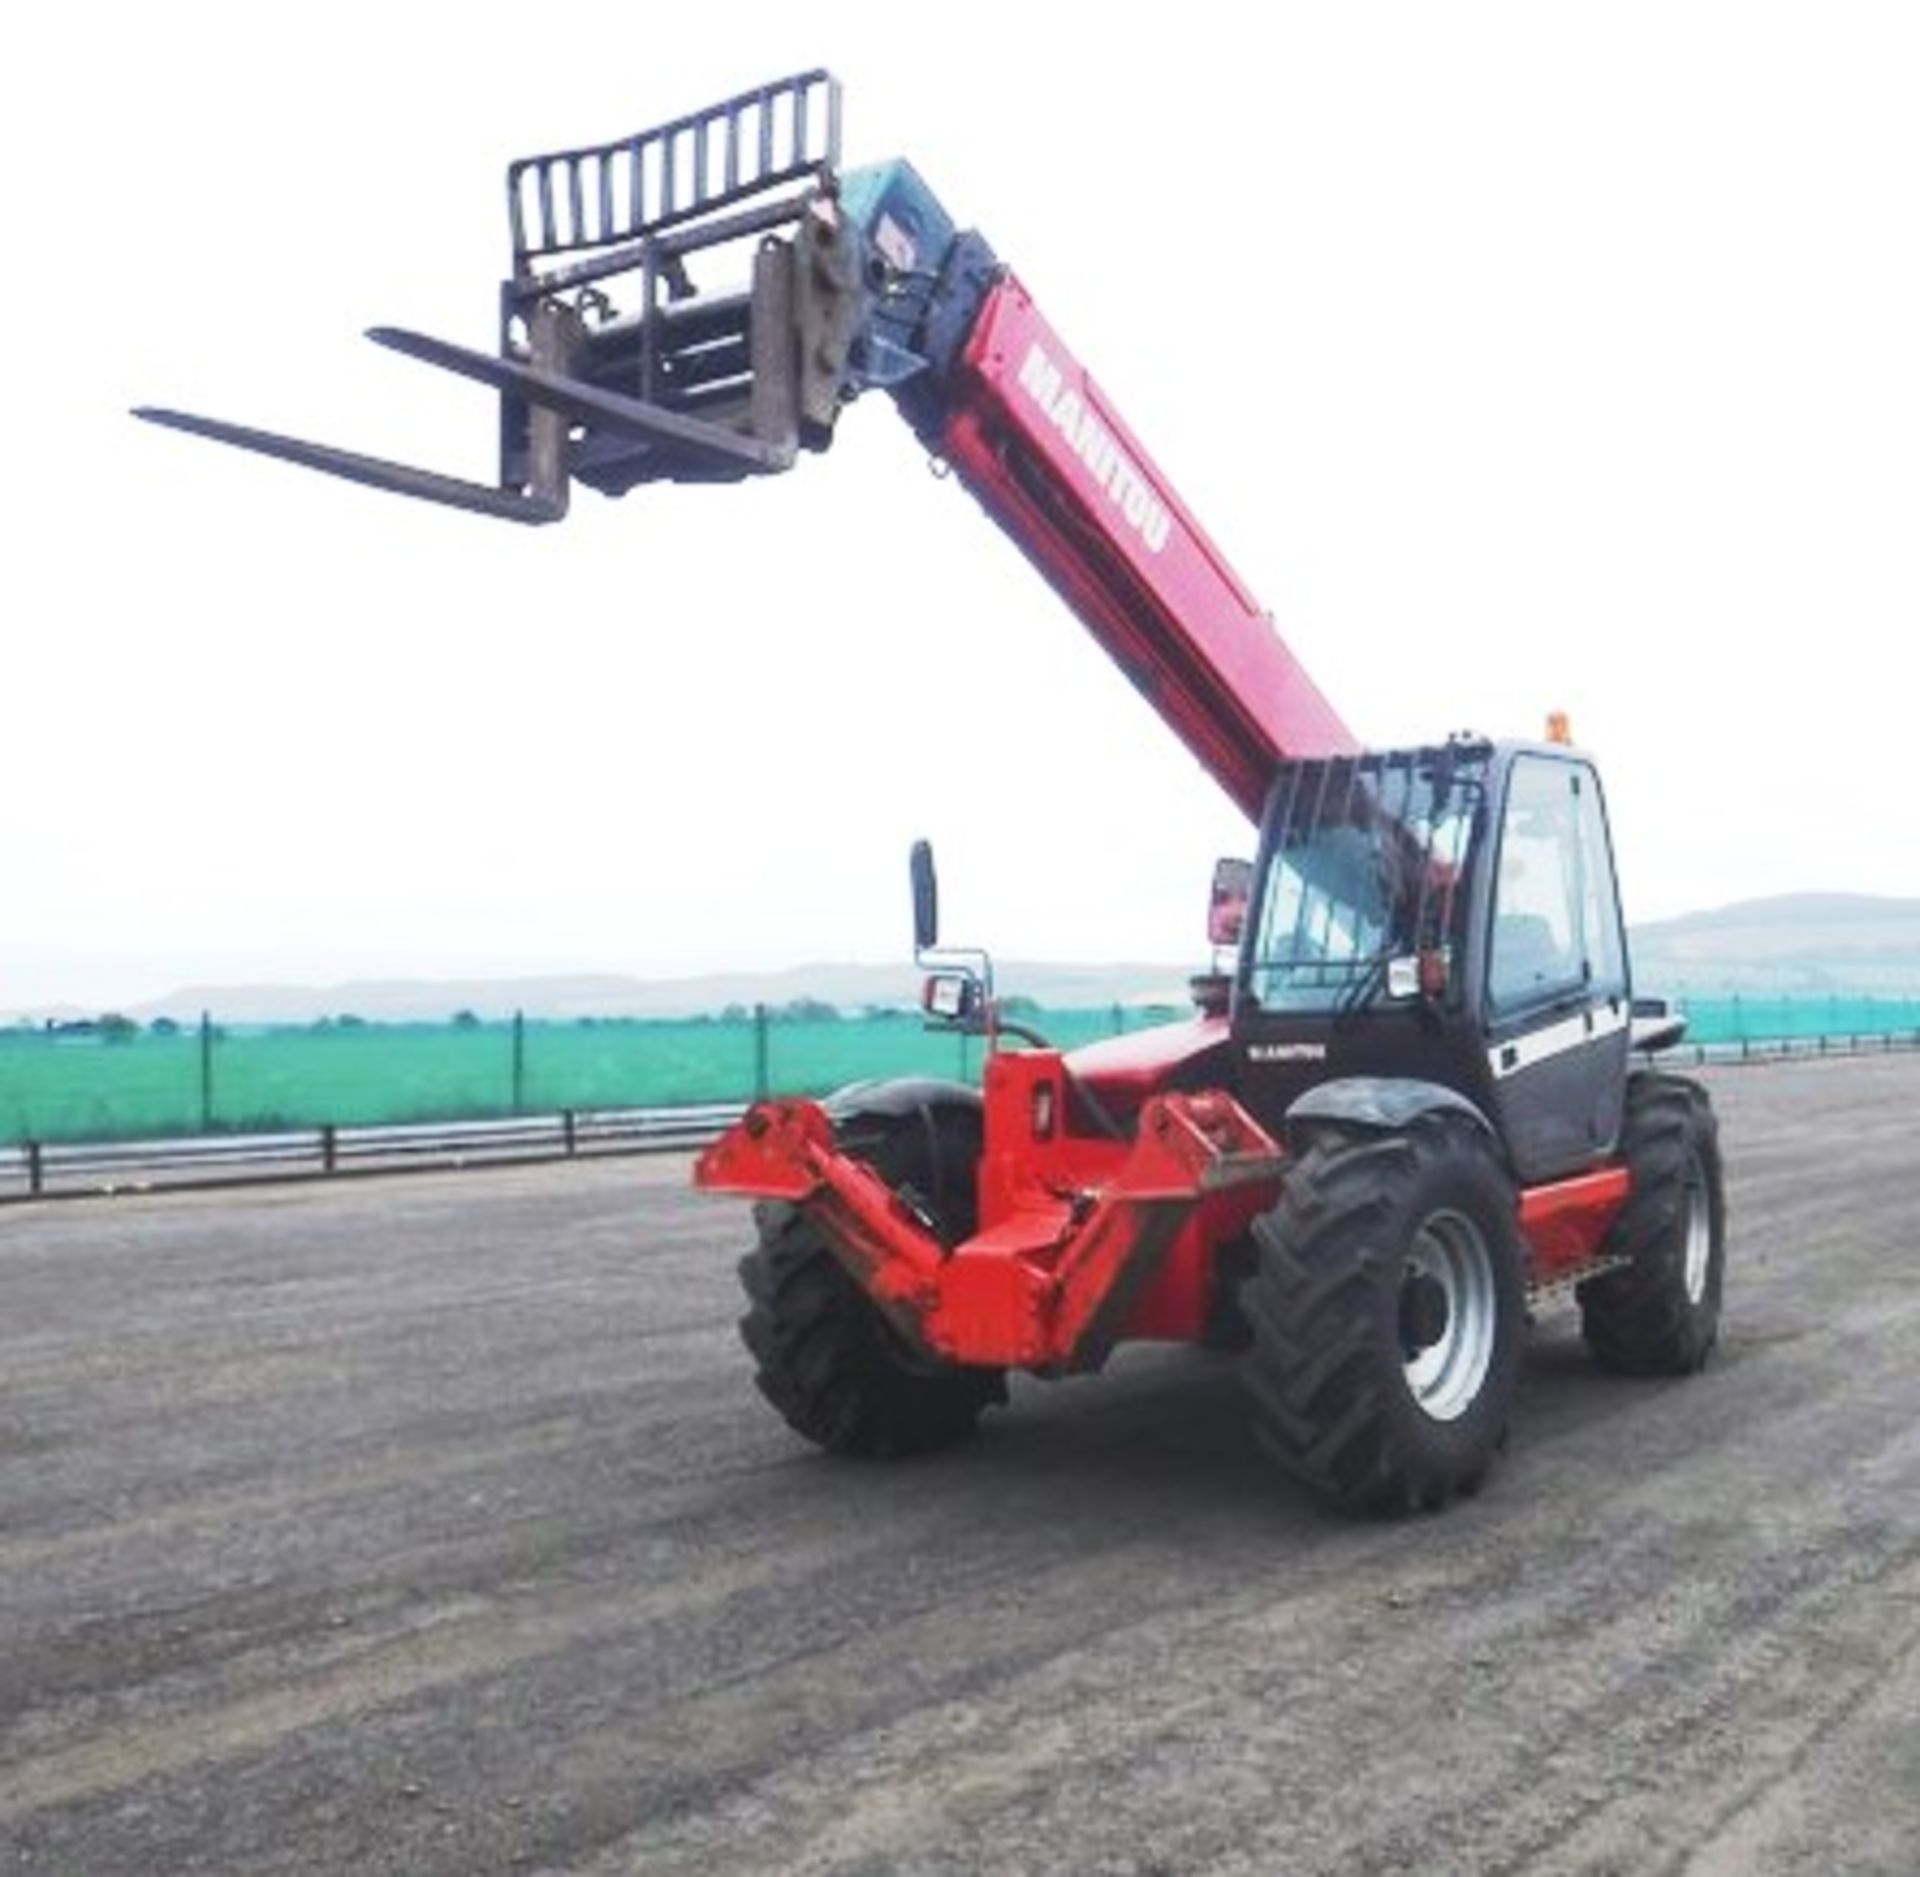 2006 MANITOU 14/35 TELEHANDLER c/w bucket & forks s/n 1230044 Reg no SP06 AXX 2646hrs (not verified) - Image 12 of 16